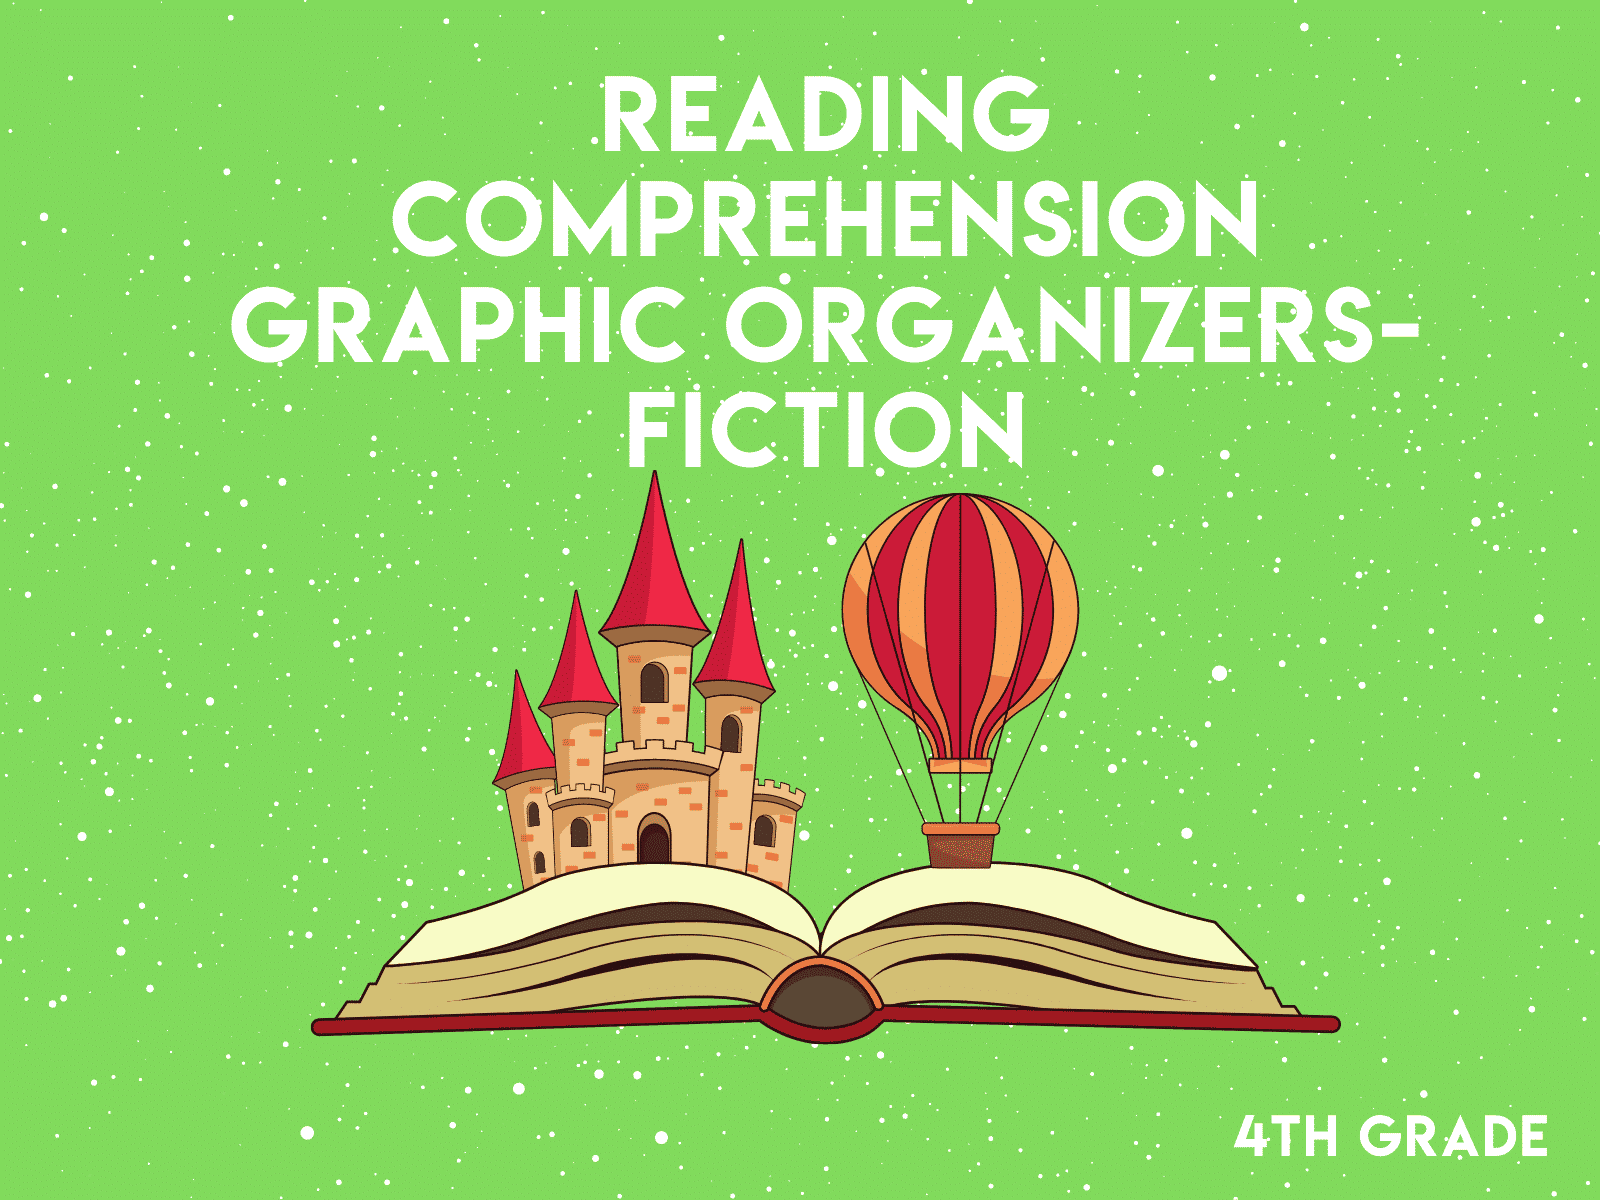 Improve reading comprehension with these fiction graphic organizers | Free fourth grade learning resource